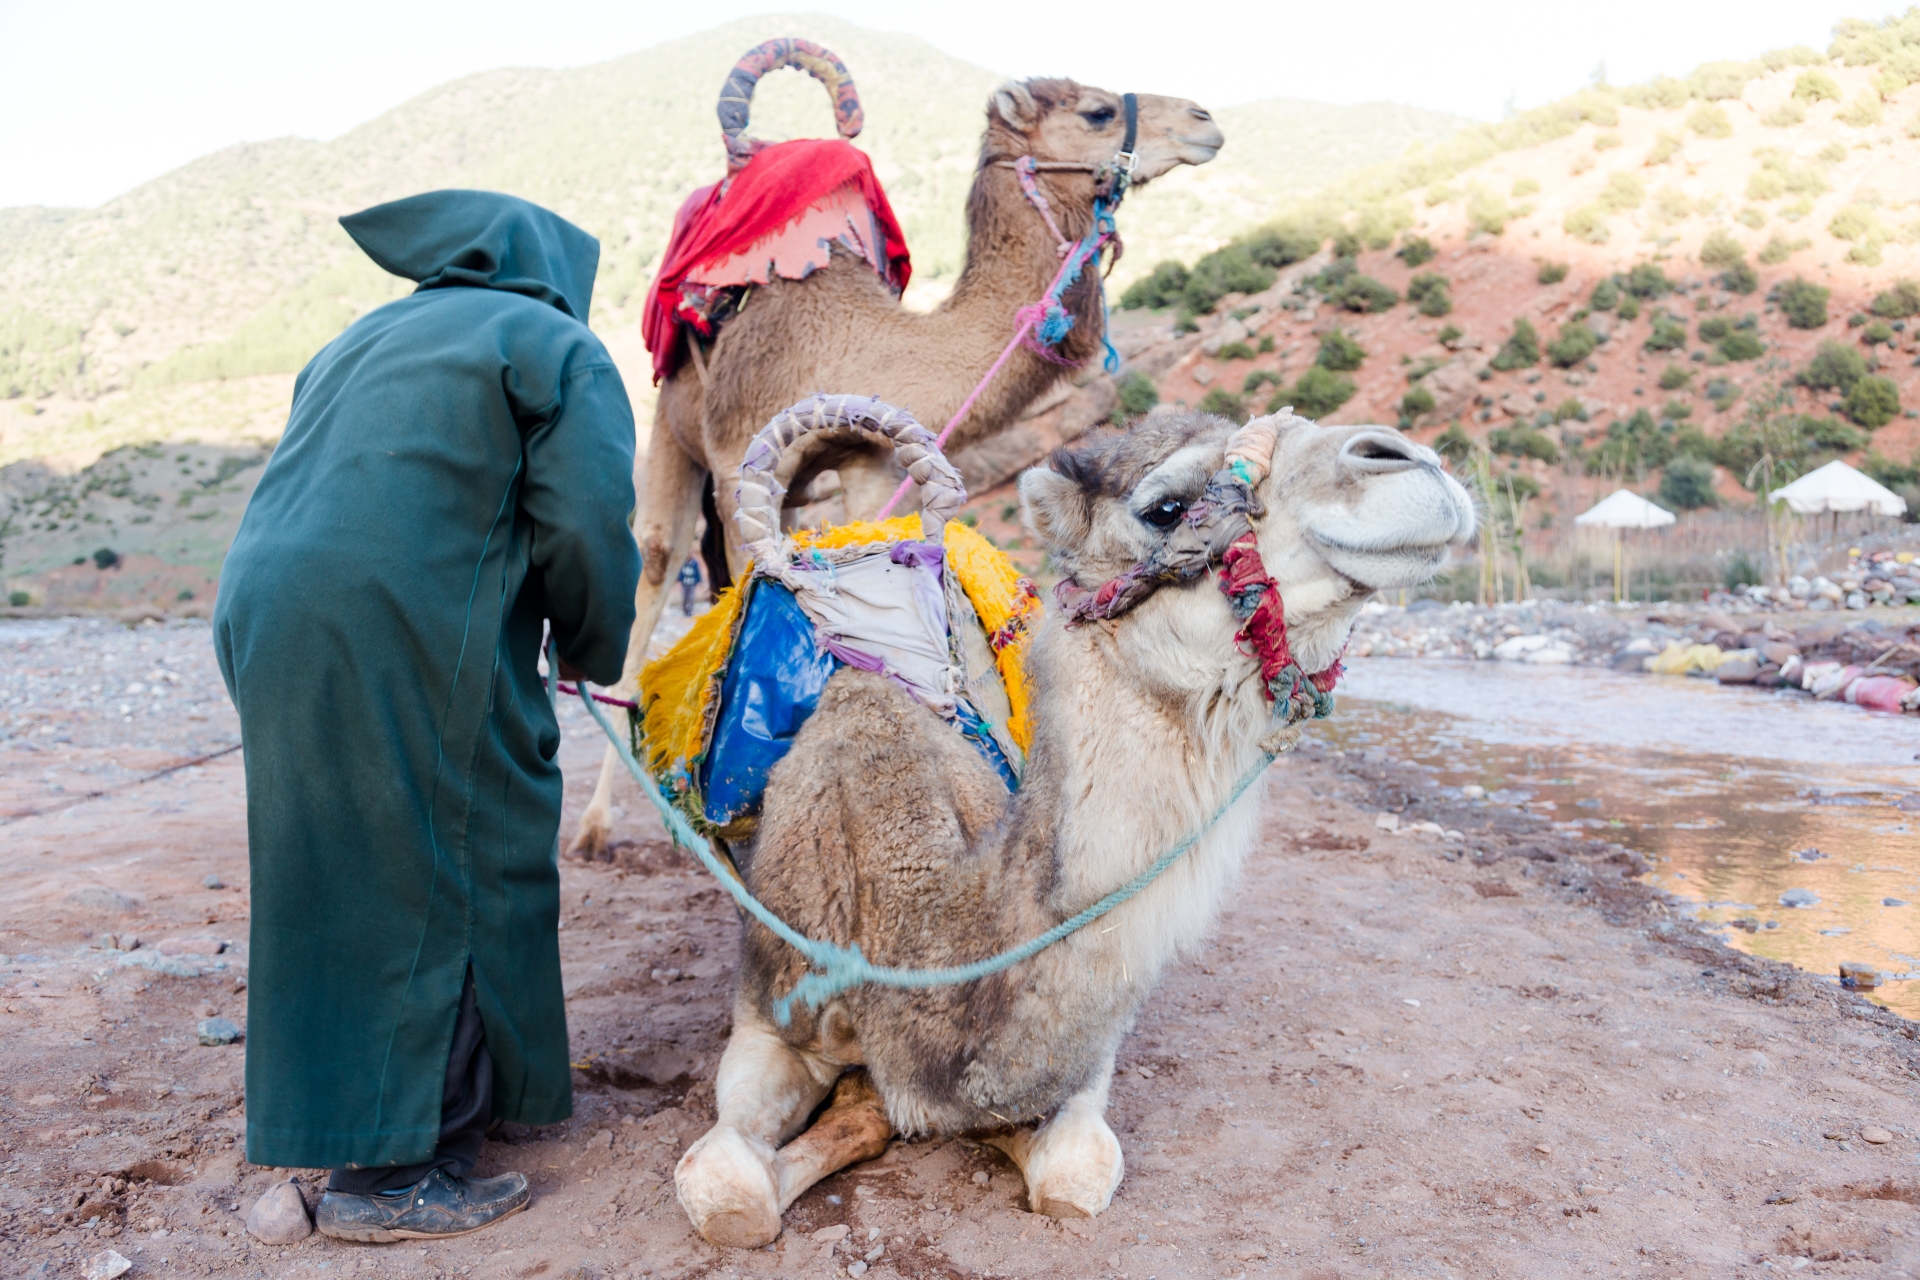 Camels - Authentic Morocco